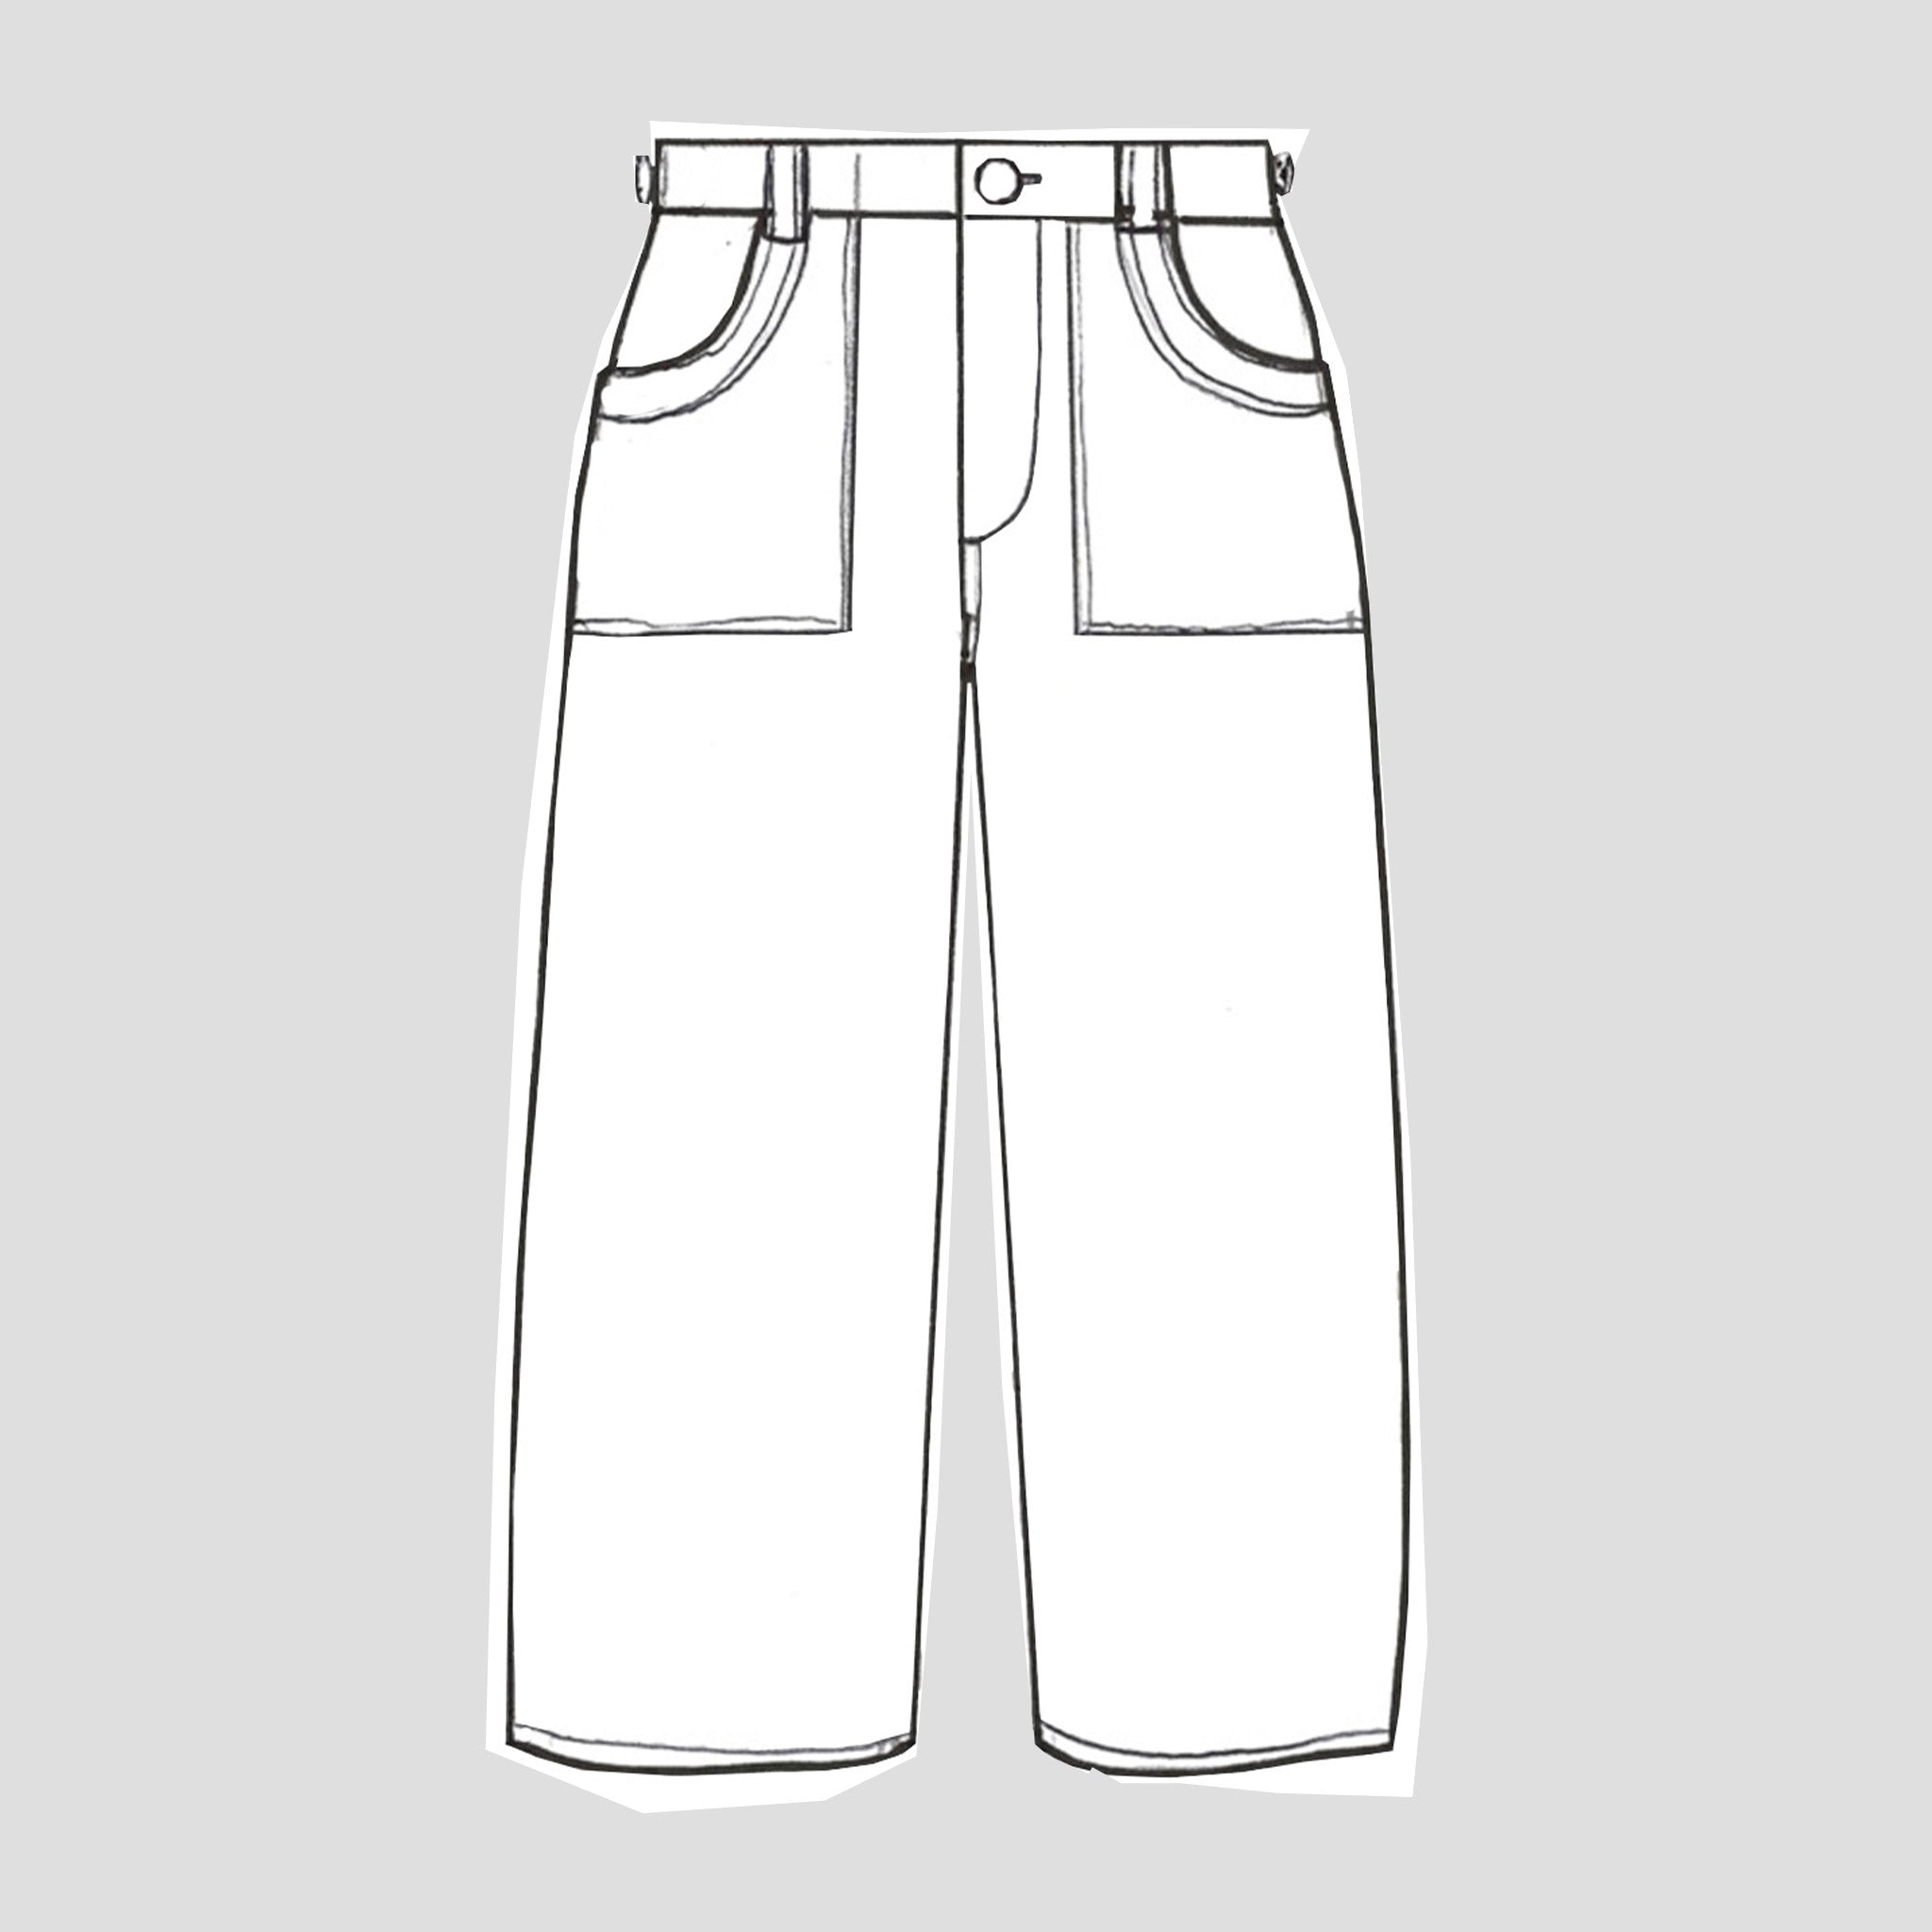 Chore trousers in tan cotton canvas